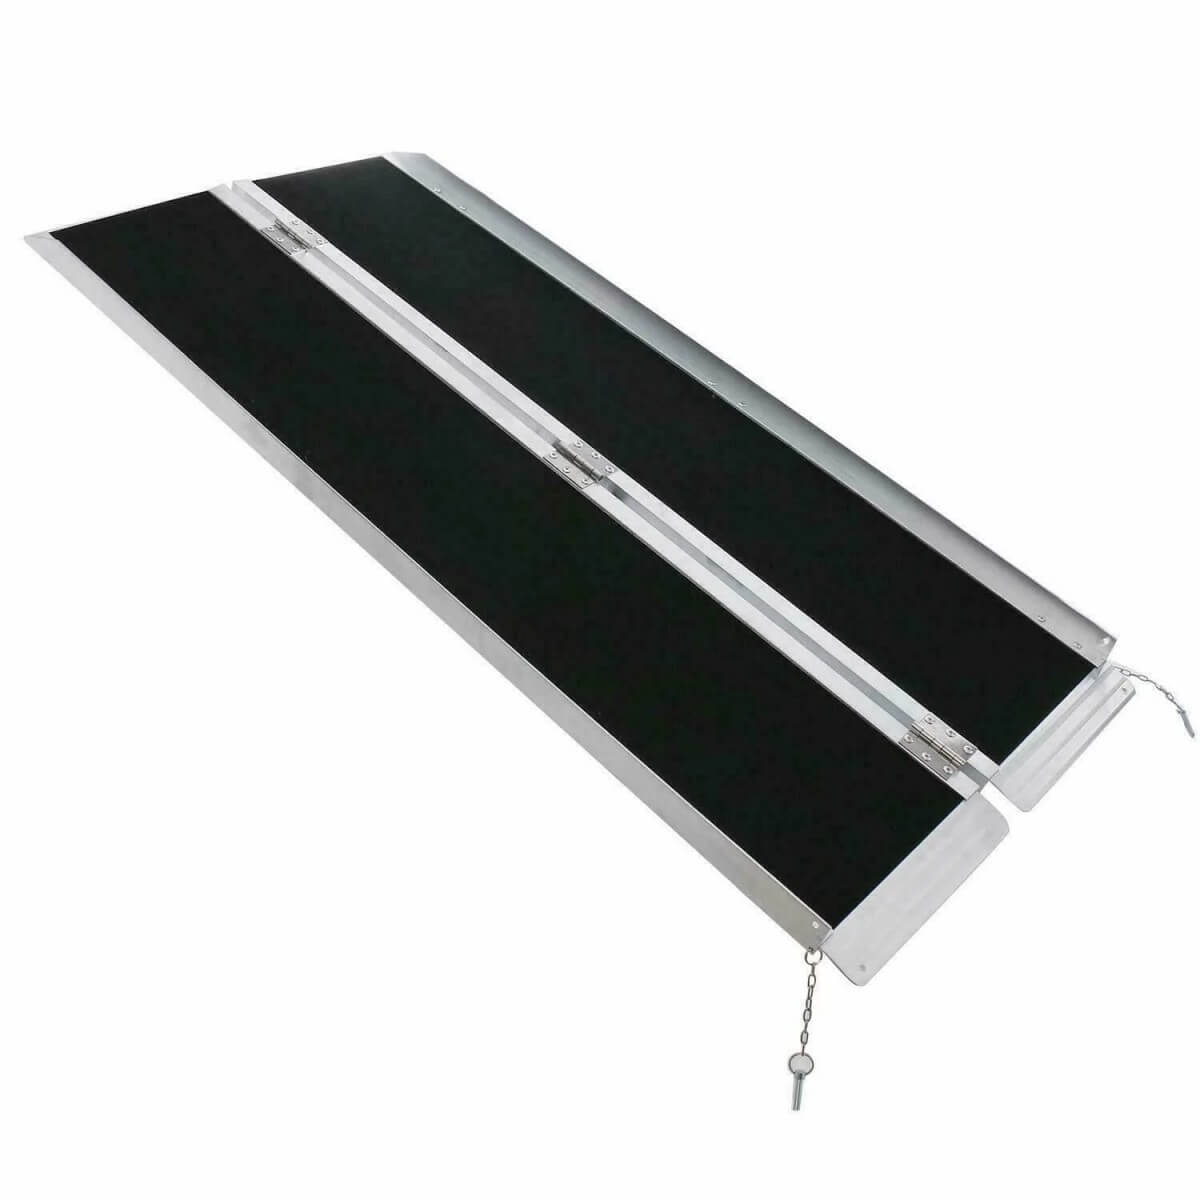 Elecwish Ramp 3FT Non Skid Aluminum Portable Wheelchair Ramp with Carrying Handle